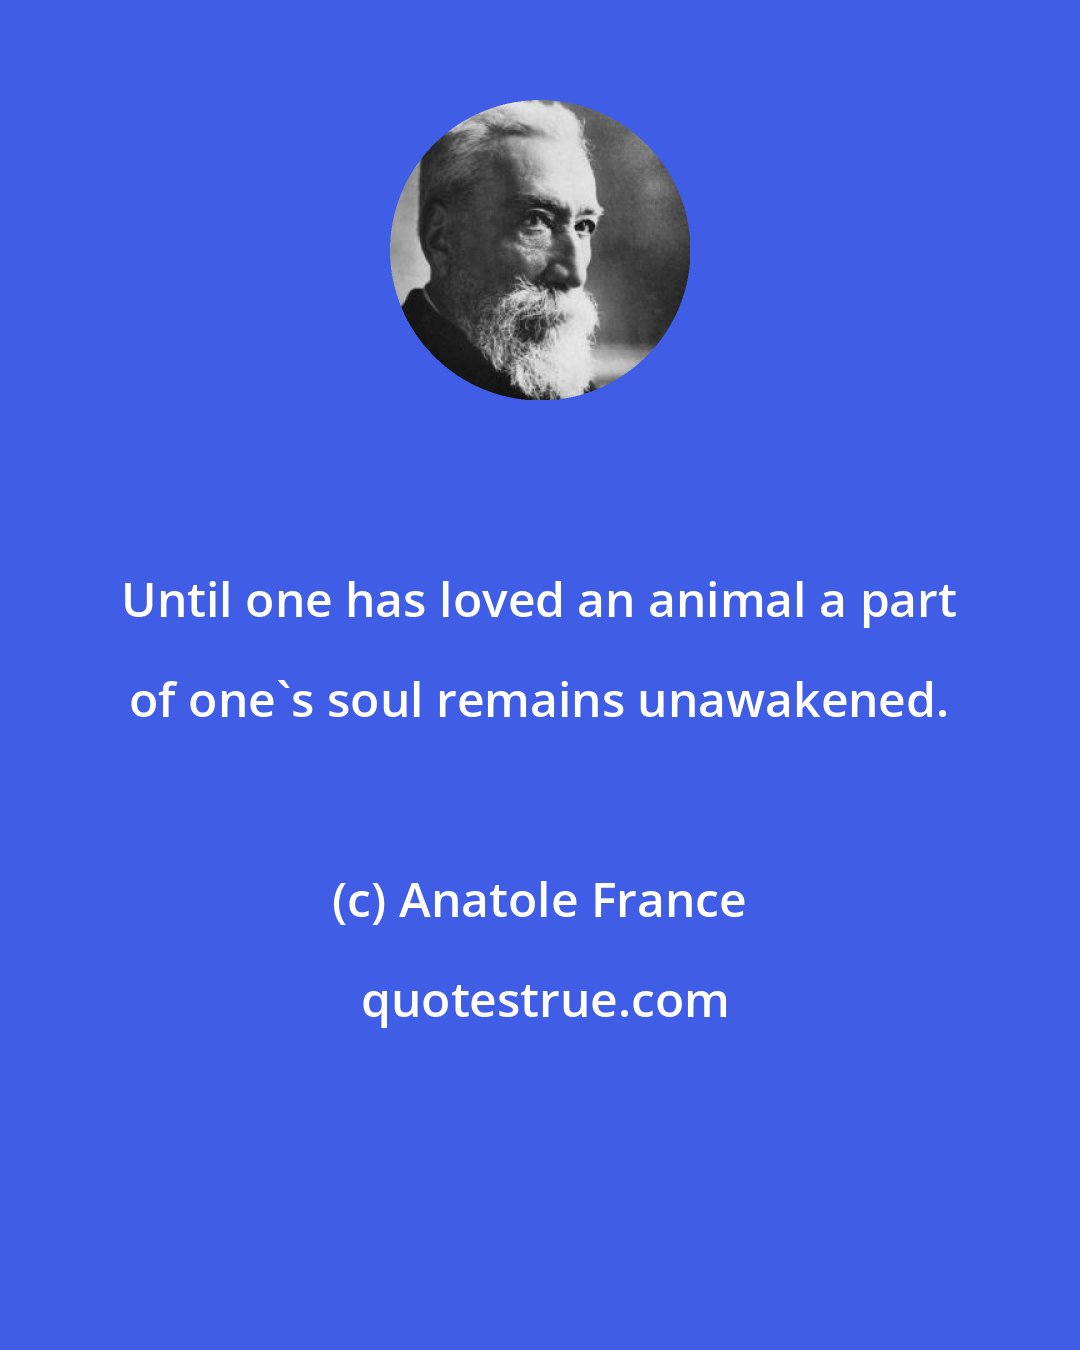 Anatole France: Until one has loved an animal a part of one's soul remains unawakened.